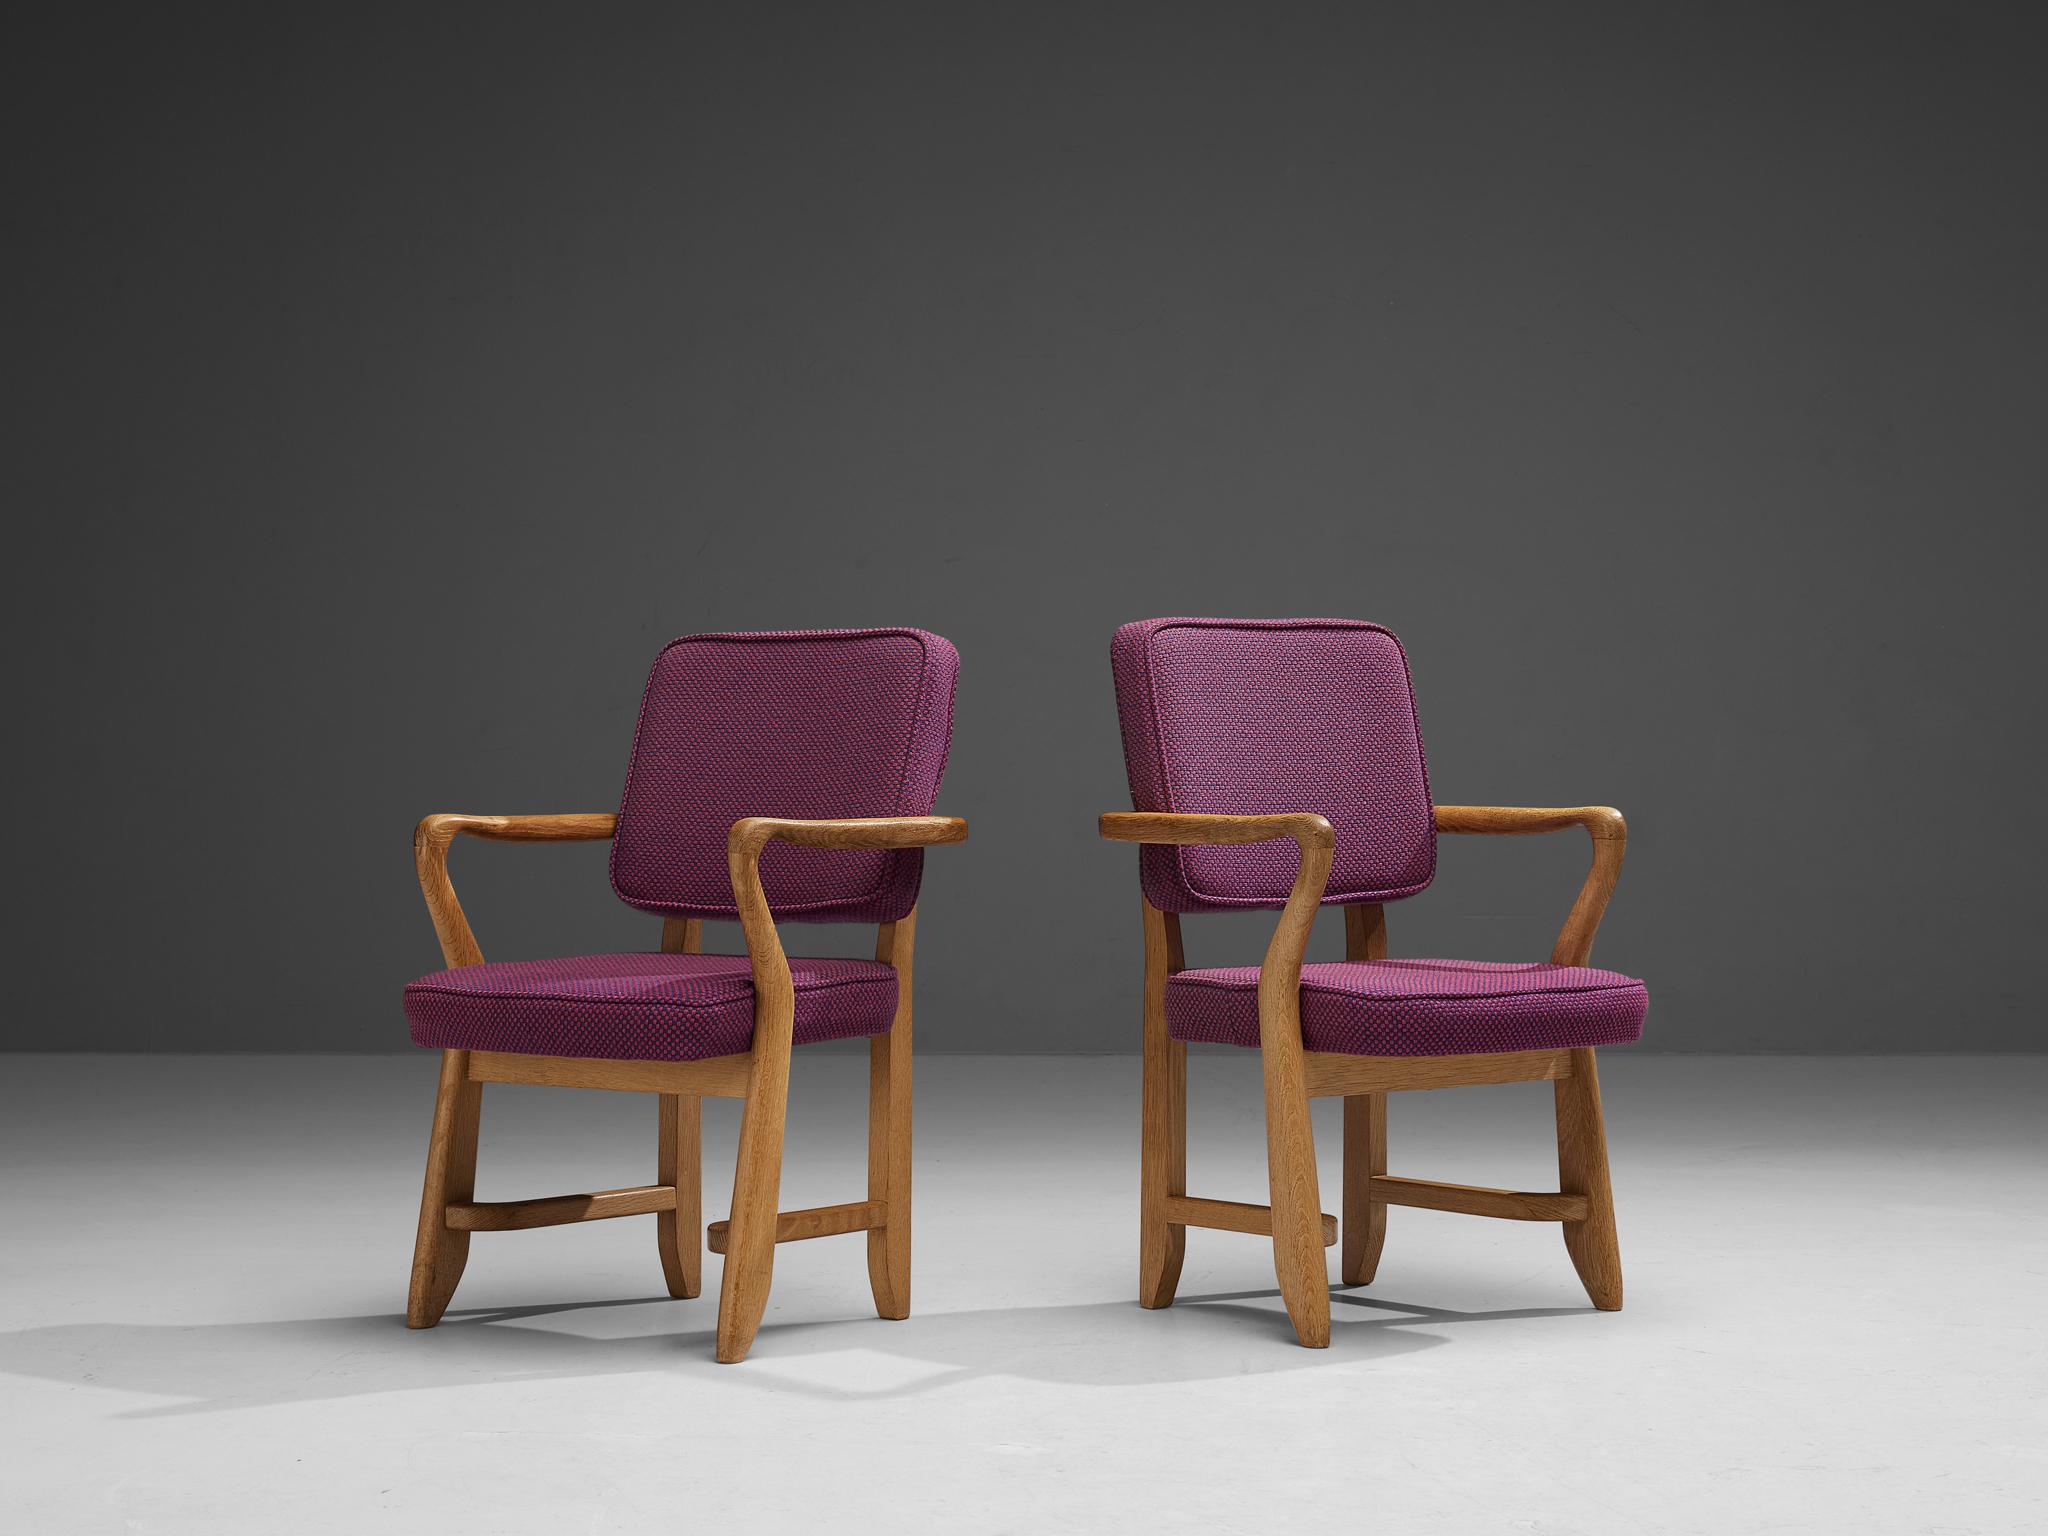 Guillerme et Chambron for Votre Maison, pair of armchairs, model 'Denis', purple fabric, oak, France, 1960s

These sculptural armchairs are designed by Guillerme et Chambron. The duo is known for their high quality solid oak furniture. These